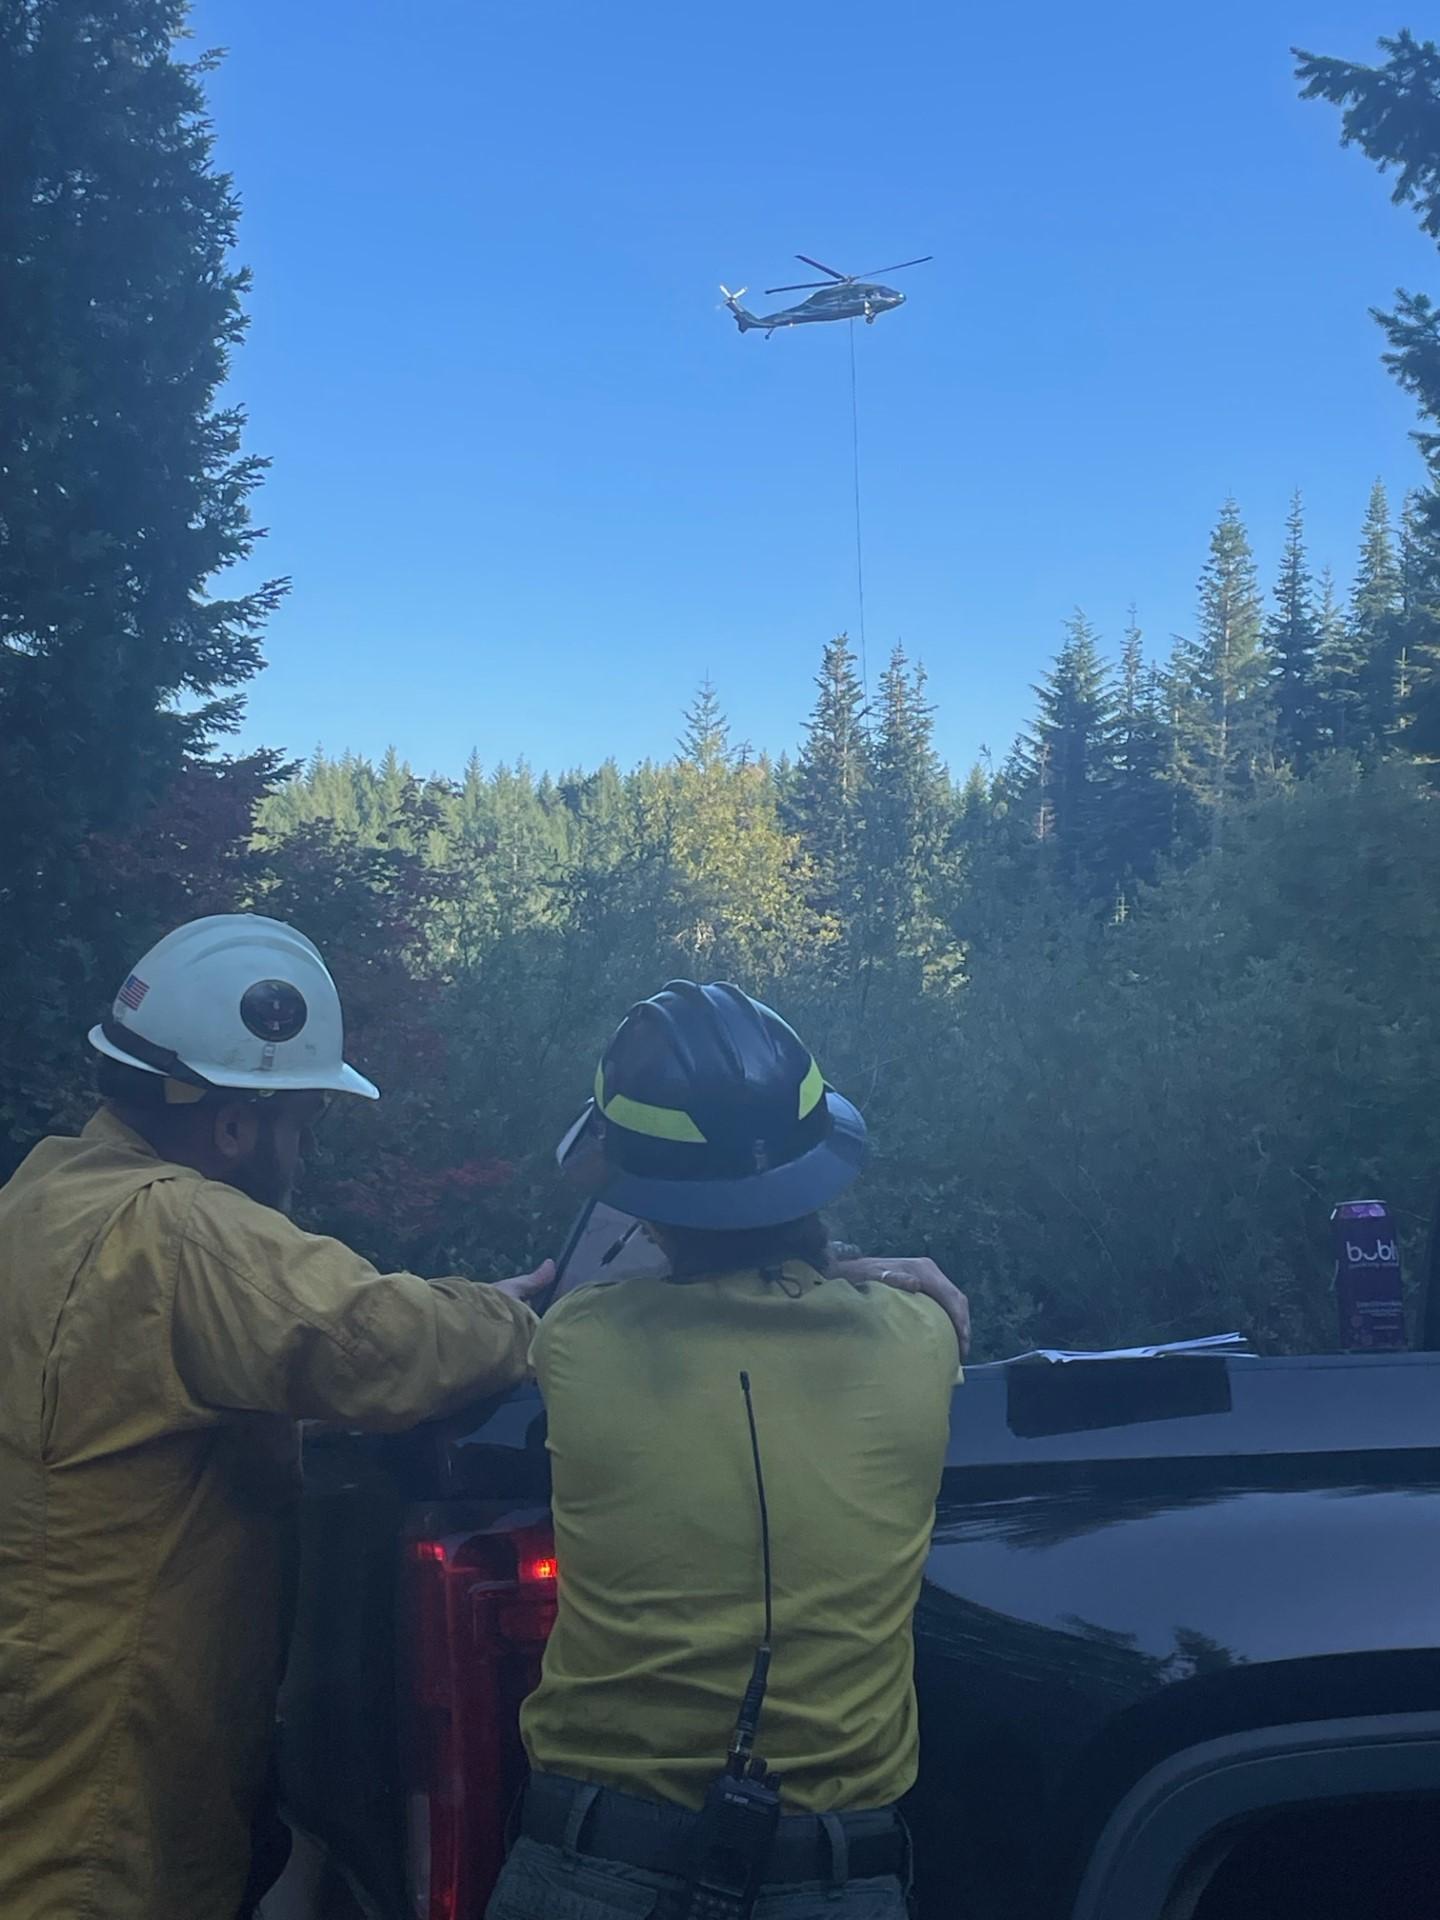 Two firefighters look at a document over a truck bed while a helicopter pulls a bucket in the distance